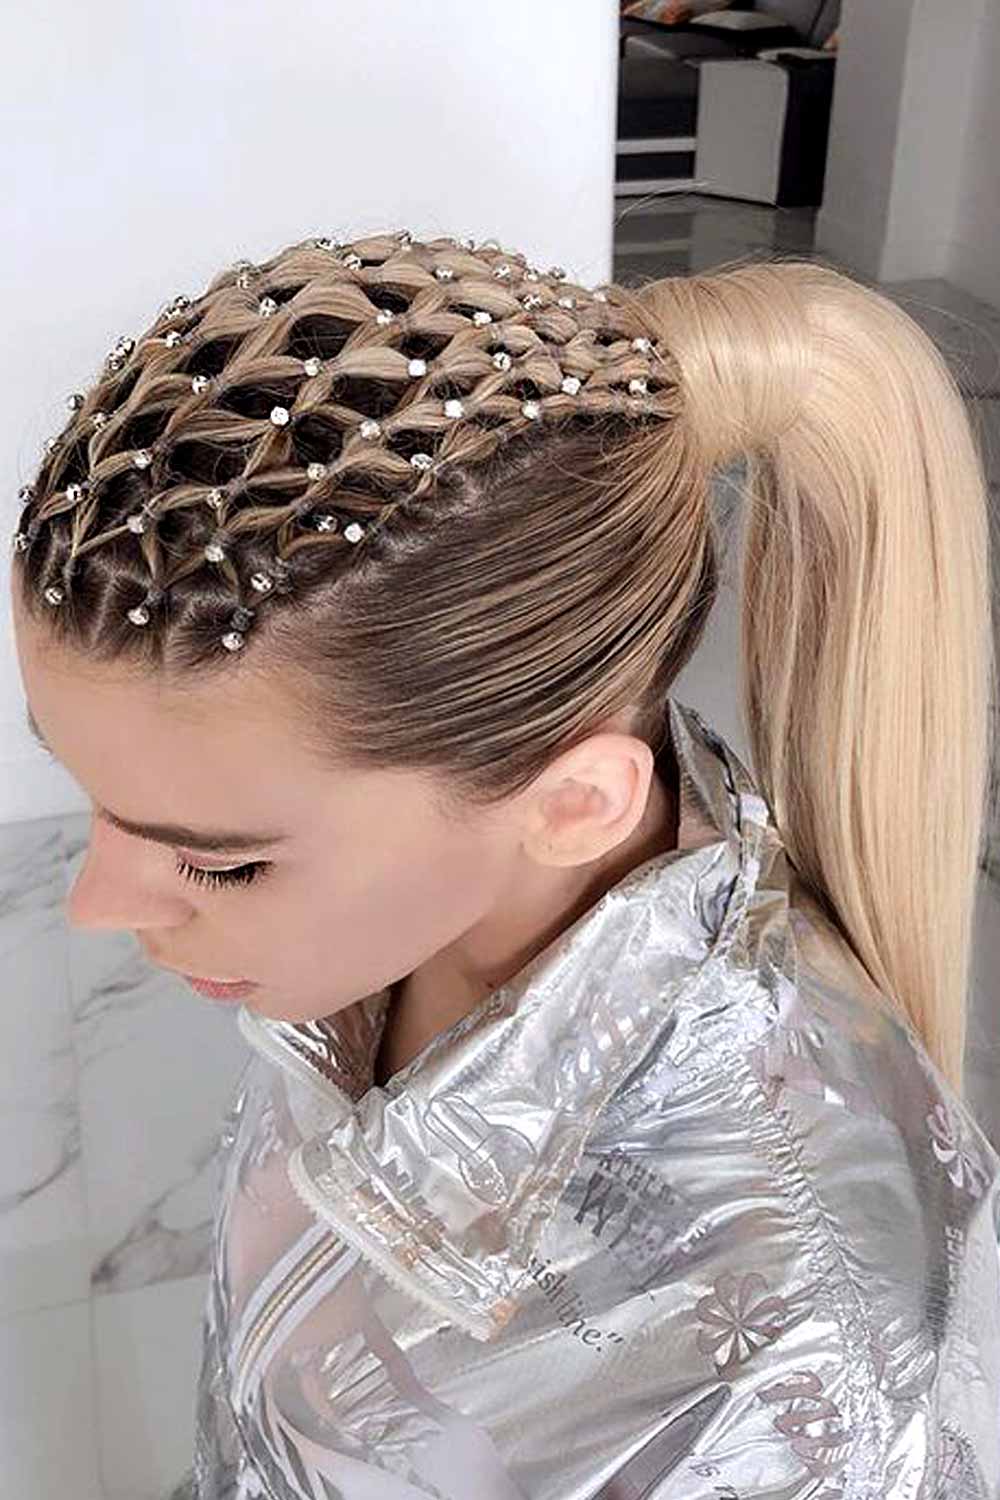 Criss Cross Rubber Band with Rhinestones Blonde #rubberbandhairstyles #naturalhairstyles #kidshairstyles